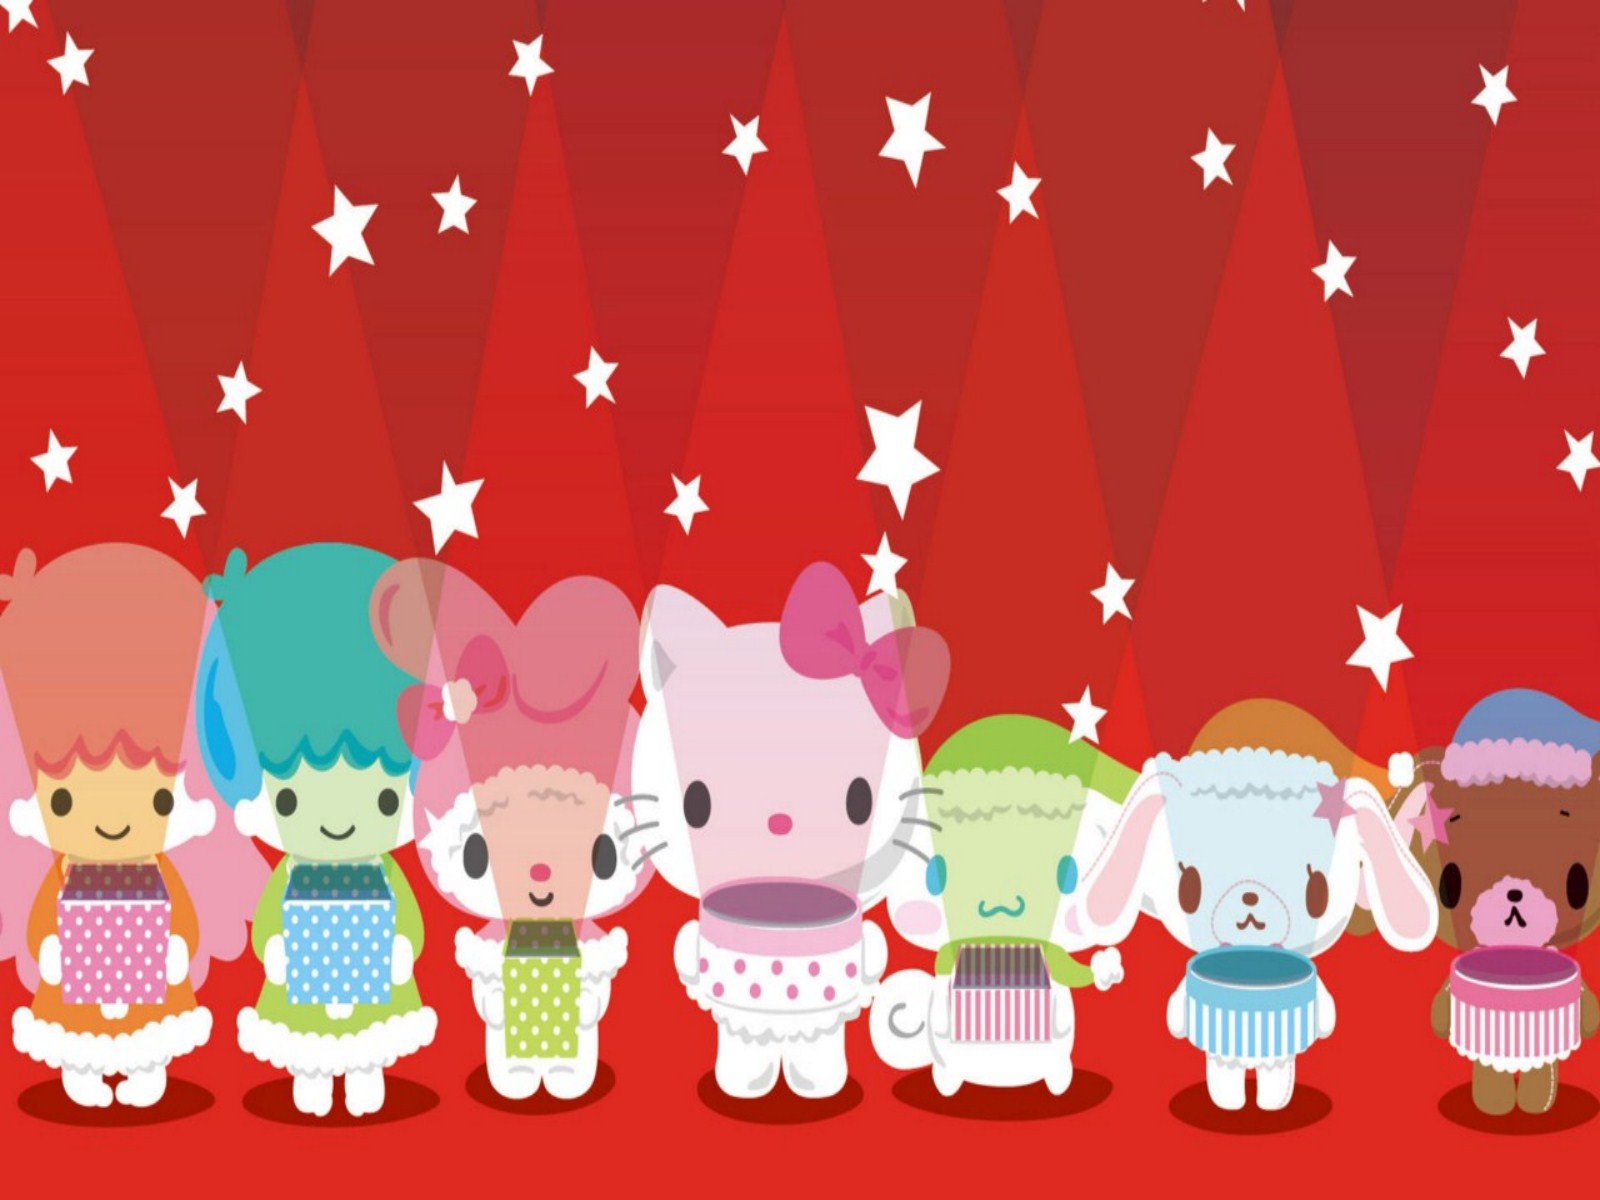 Hello Kitty Christmas Background HD Wallpaper In Cartoons